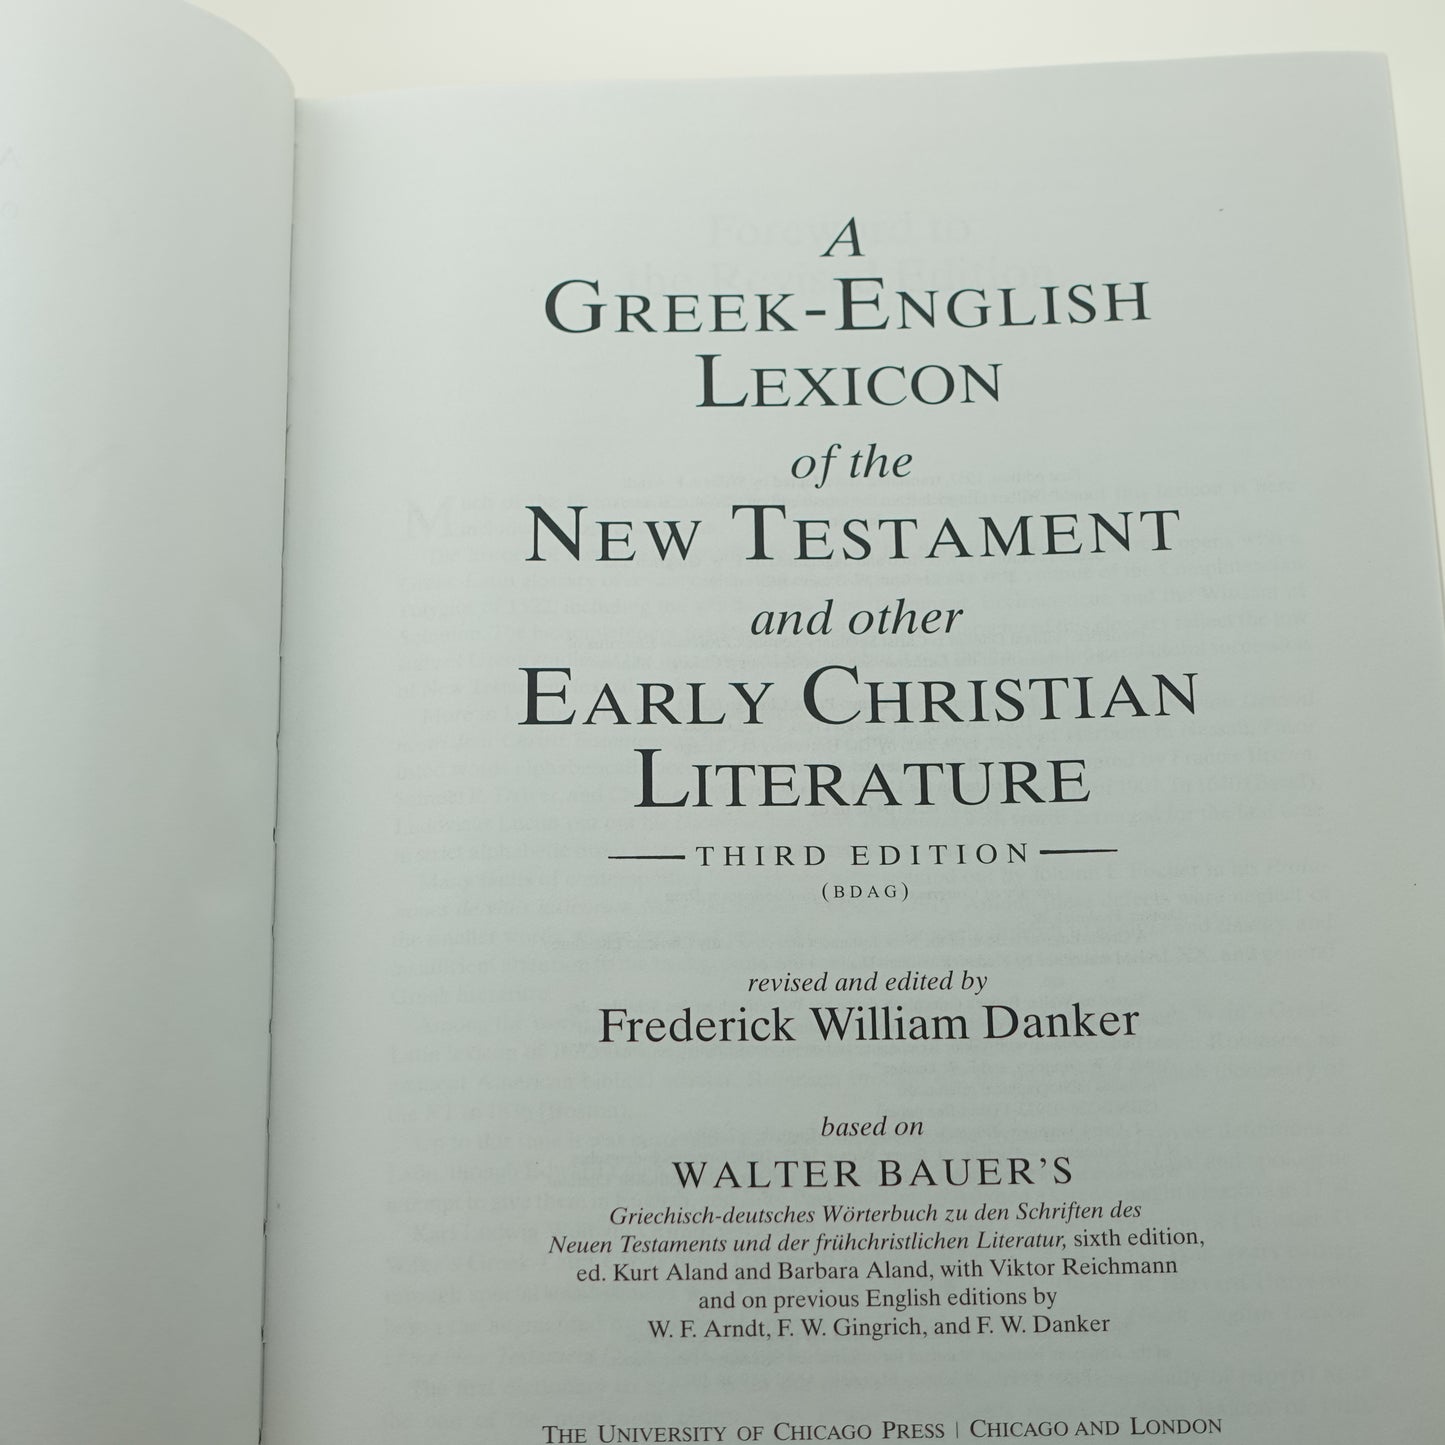 Greek-English Lexicon of the New Testament (3rd Edition)